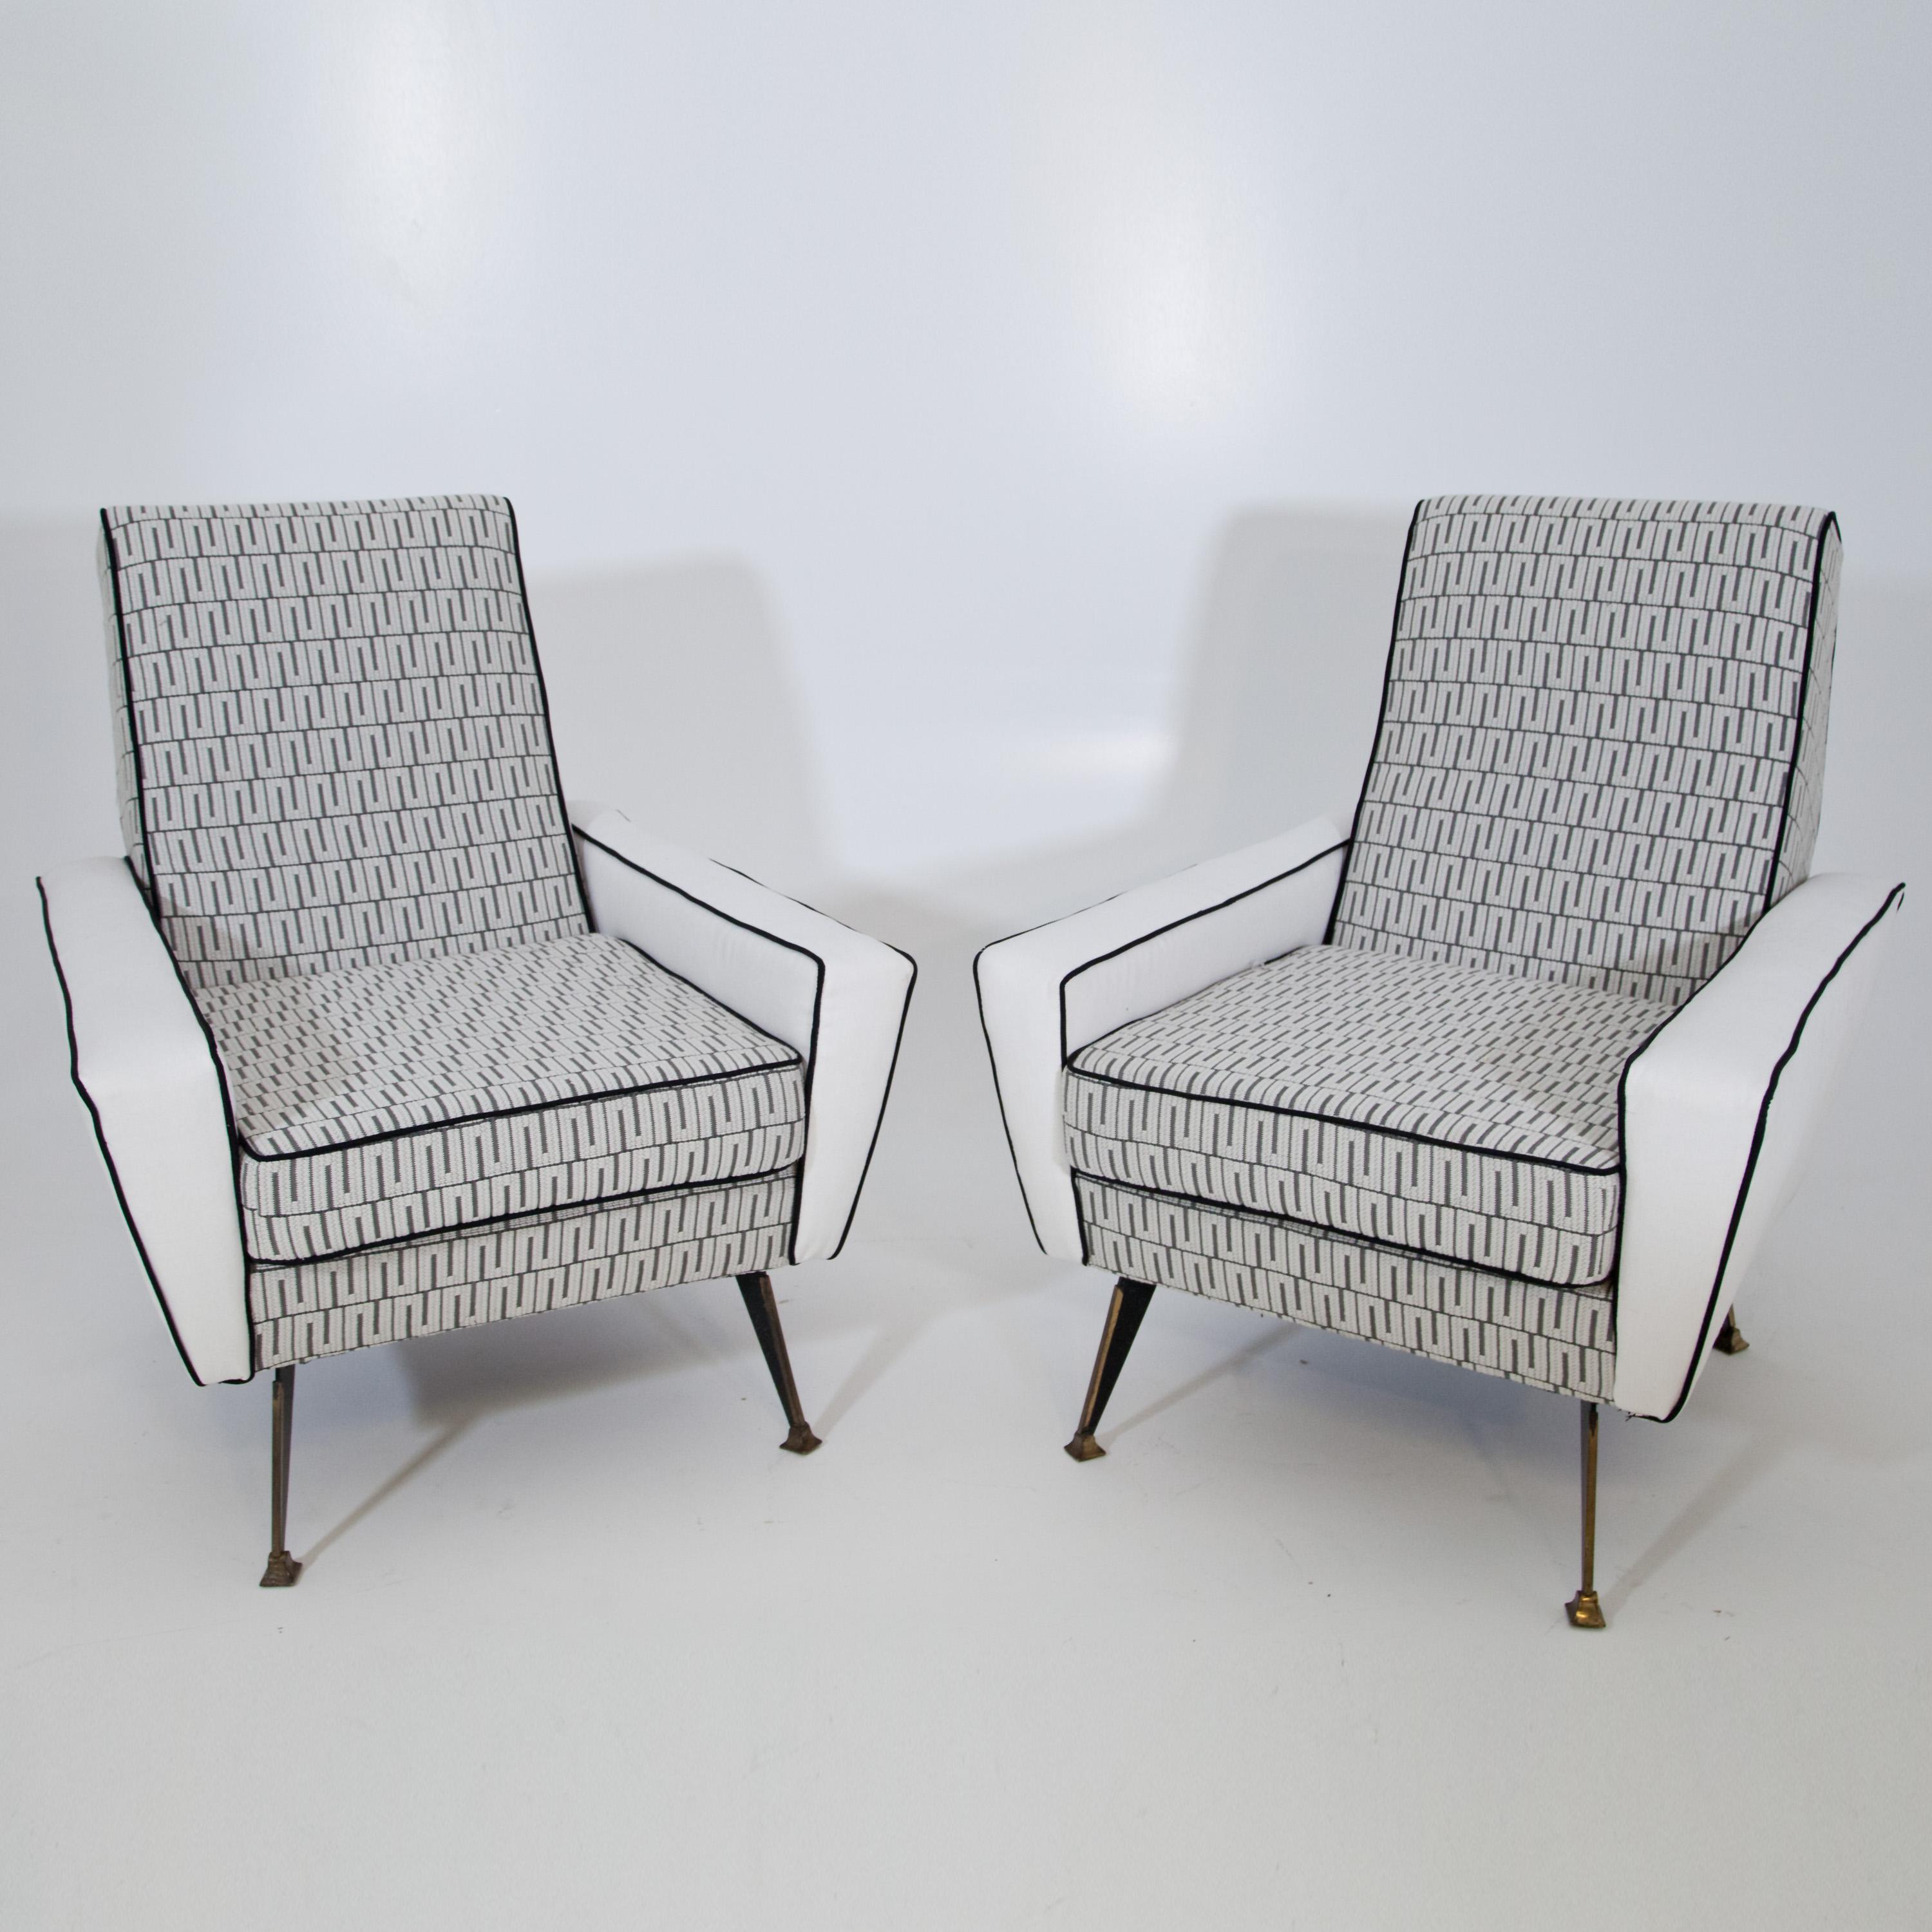 Pair of midcentury lounge chairs on metal legs and wide upholstered seat. They are newly upholstered with a high-quality fabric in cream and grey with Meander design and black piping.